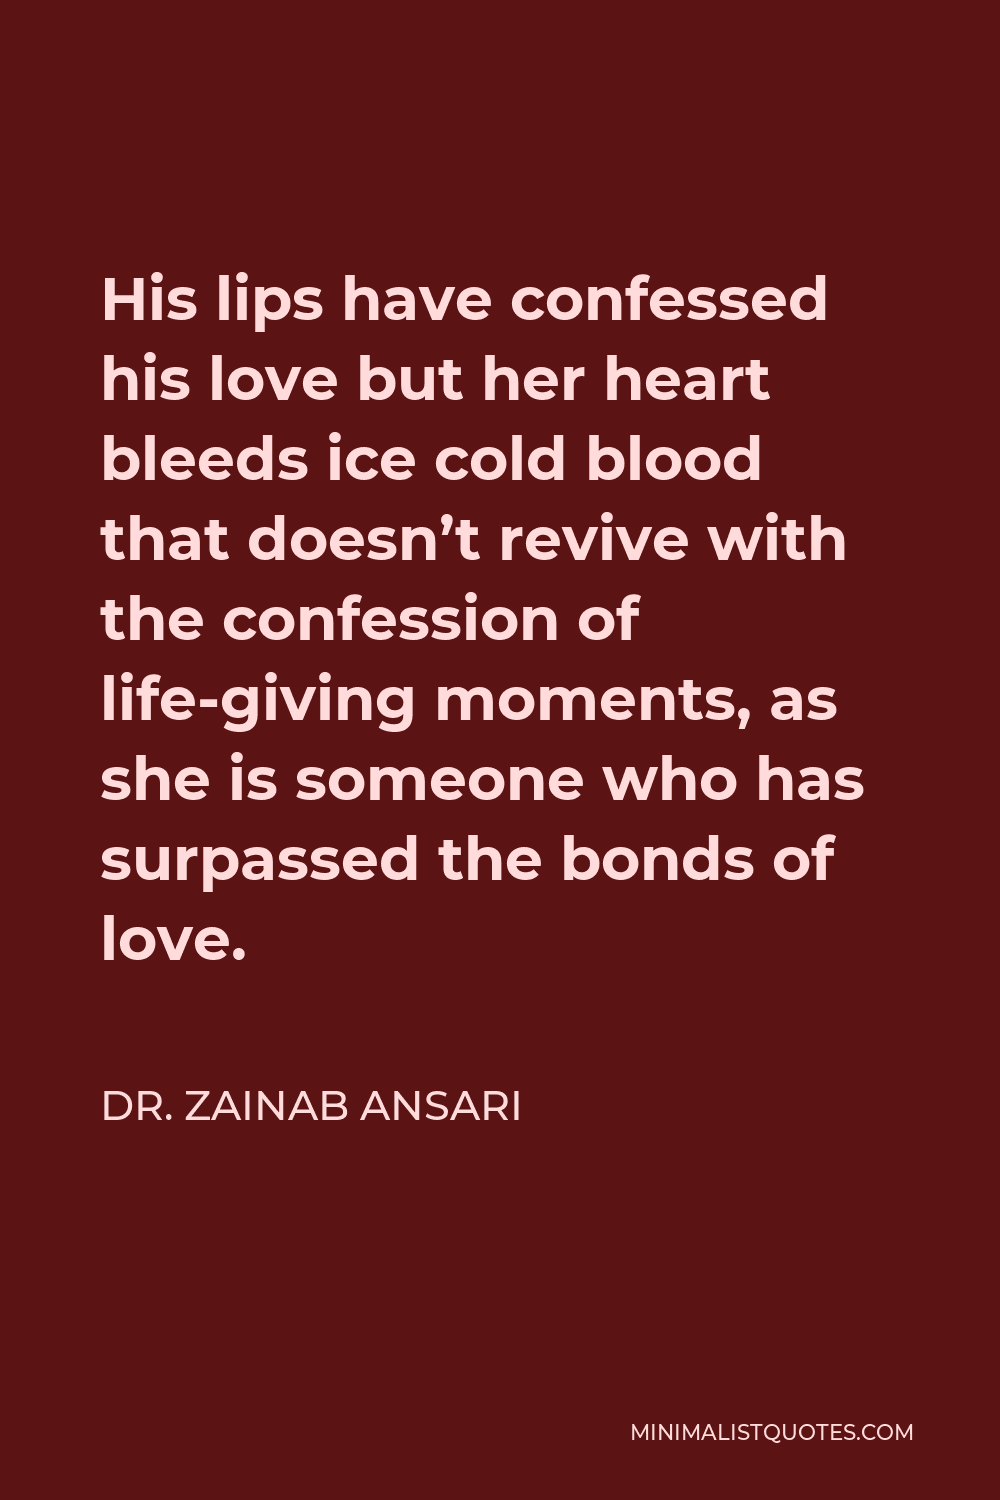 Dr. Zainab Ansari Quote - His lips have confessed his love but her heart bleeds ice cold blood that doesn’t revive with the confession of life-giving moments, as she is someone who has surpassed the bonds of love.